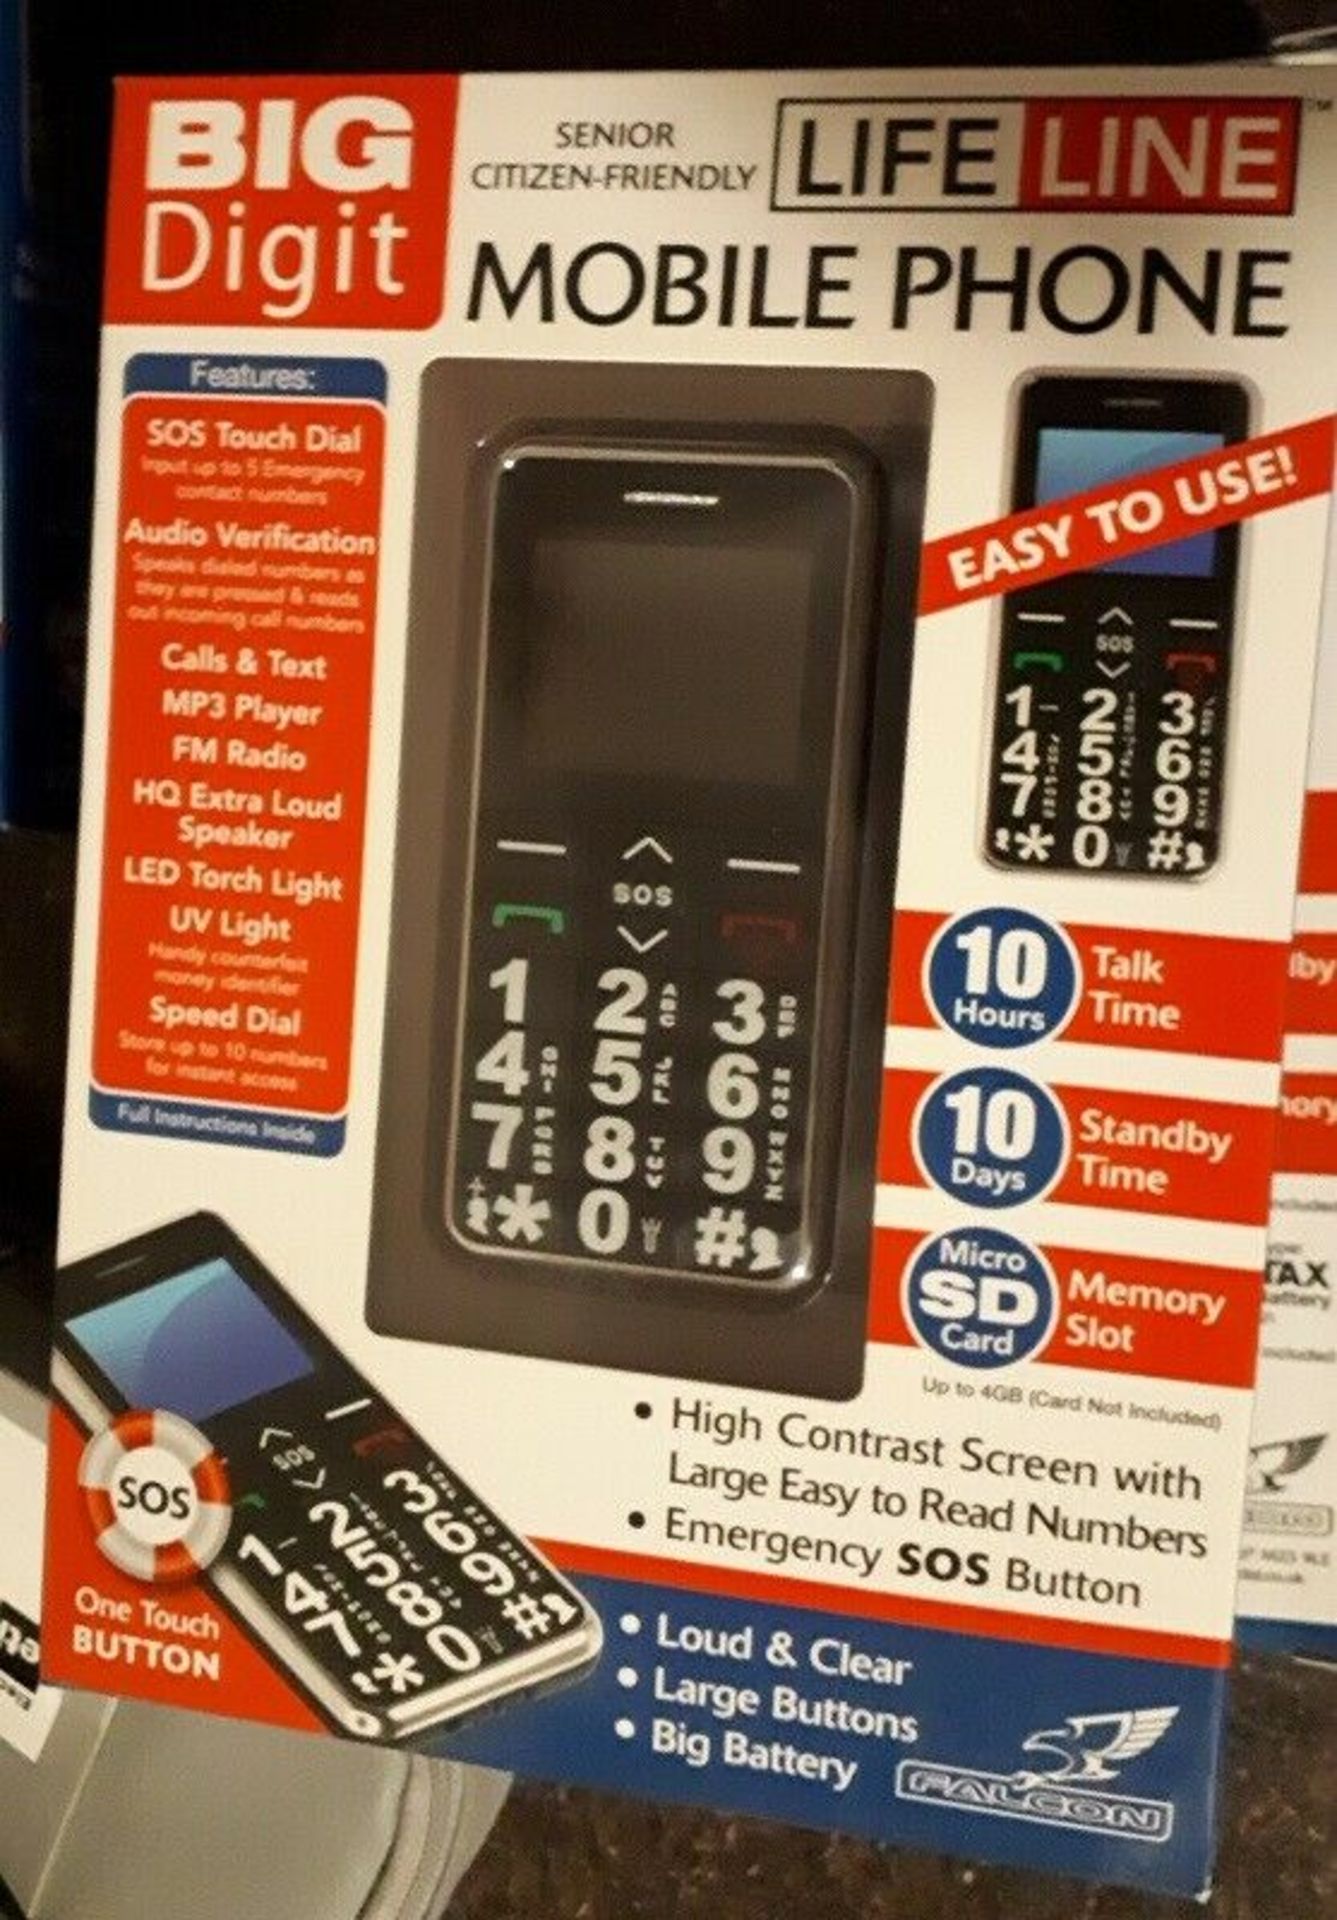 4 x NEW BOXED BIG DIGIT LIFE LINE MOBILE PHONE. 10 HOURS TALK TIME. 10 DAYS STANDBY TIME. MICRO SD